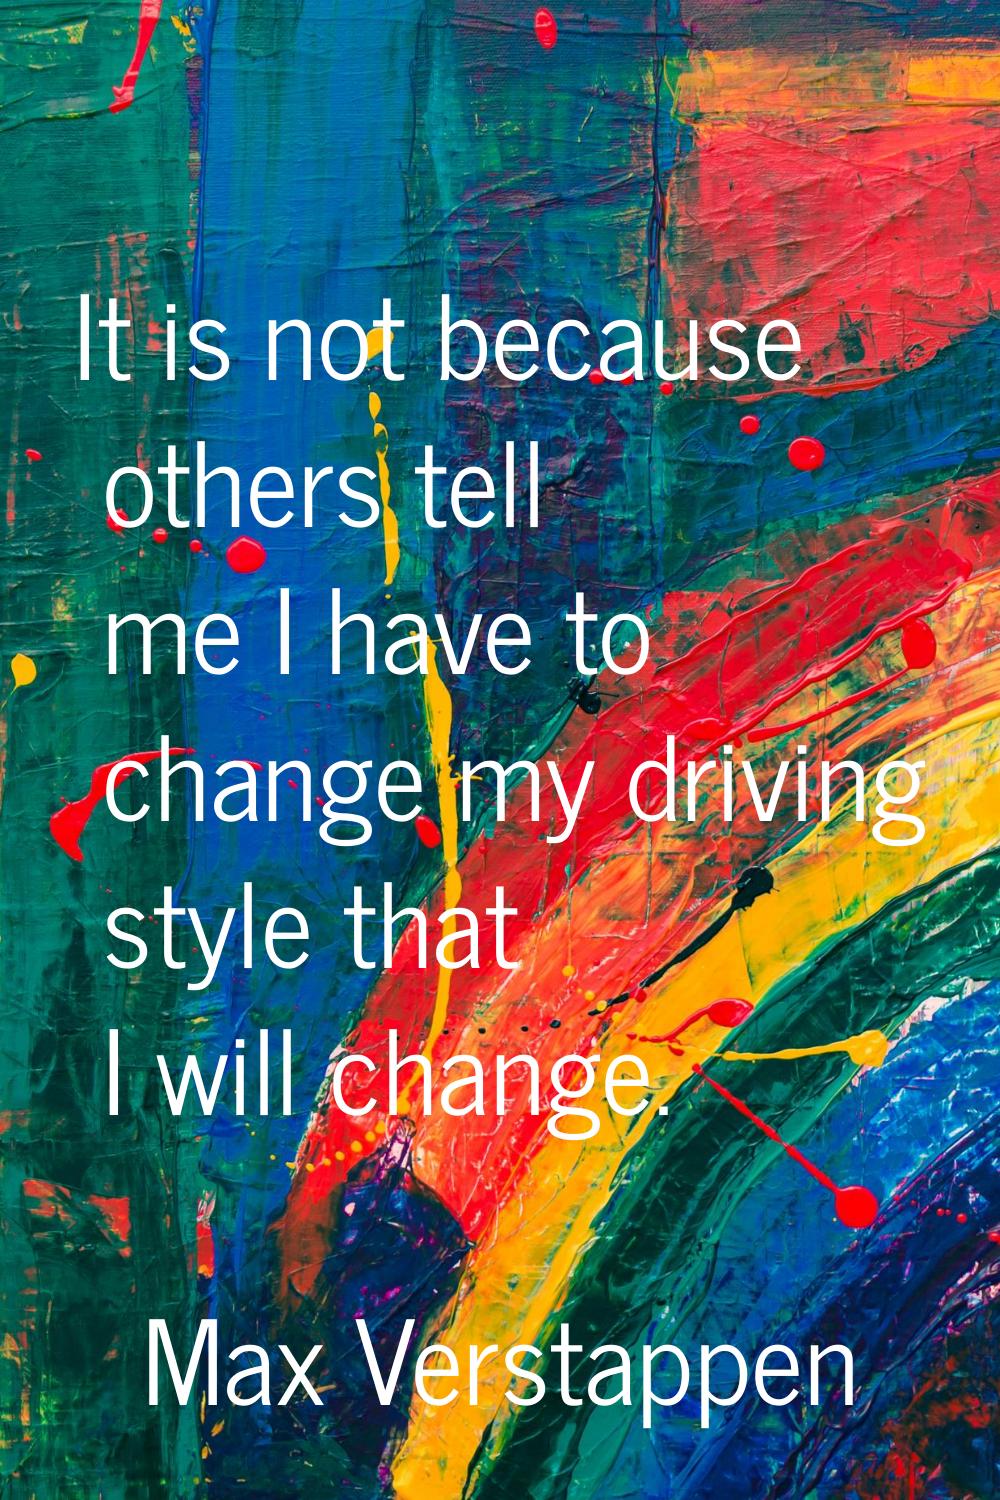 It is not because others tell me I have to change my driving style that I will change.